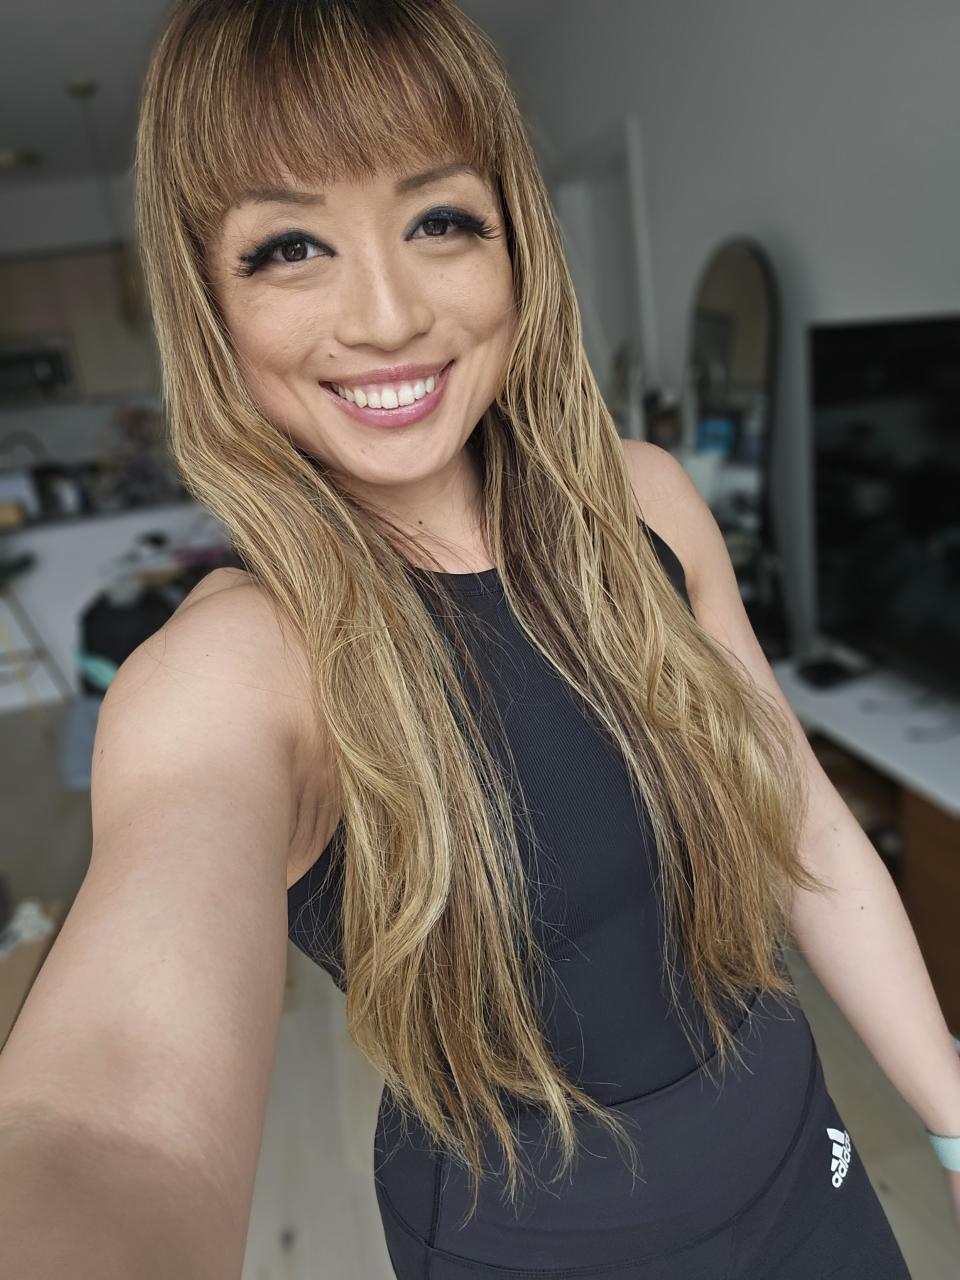 <p>Galaxy S23 Plus camera sample: A smiling woman with long blonde hair in a living room, with the background slightly blurred.</p>
